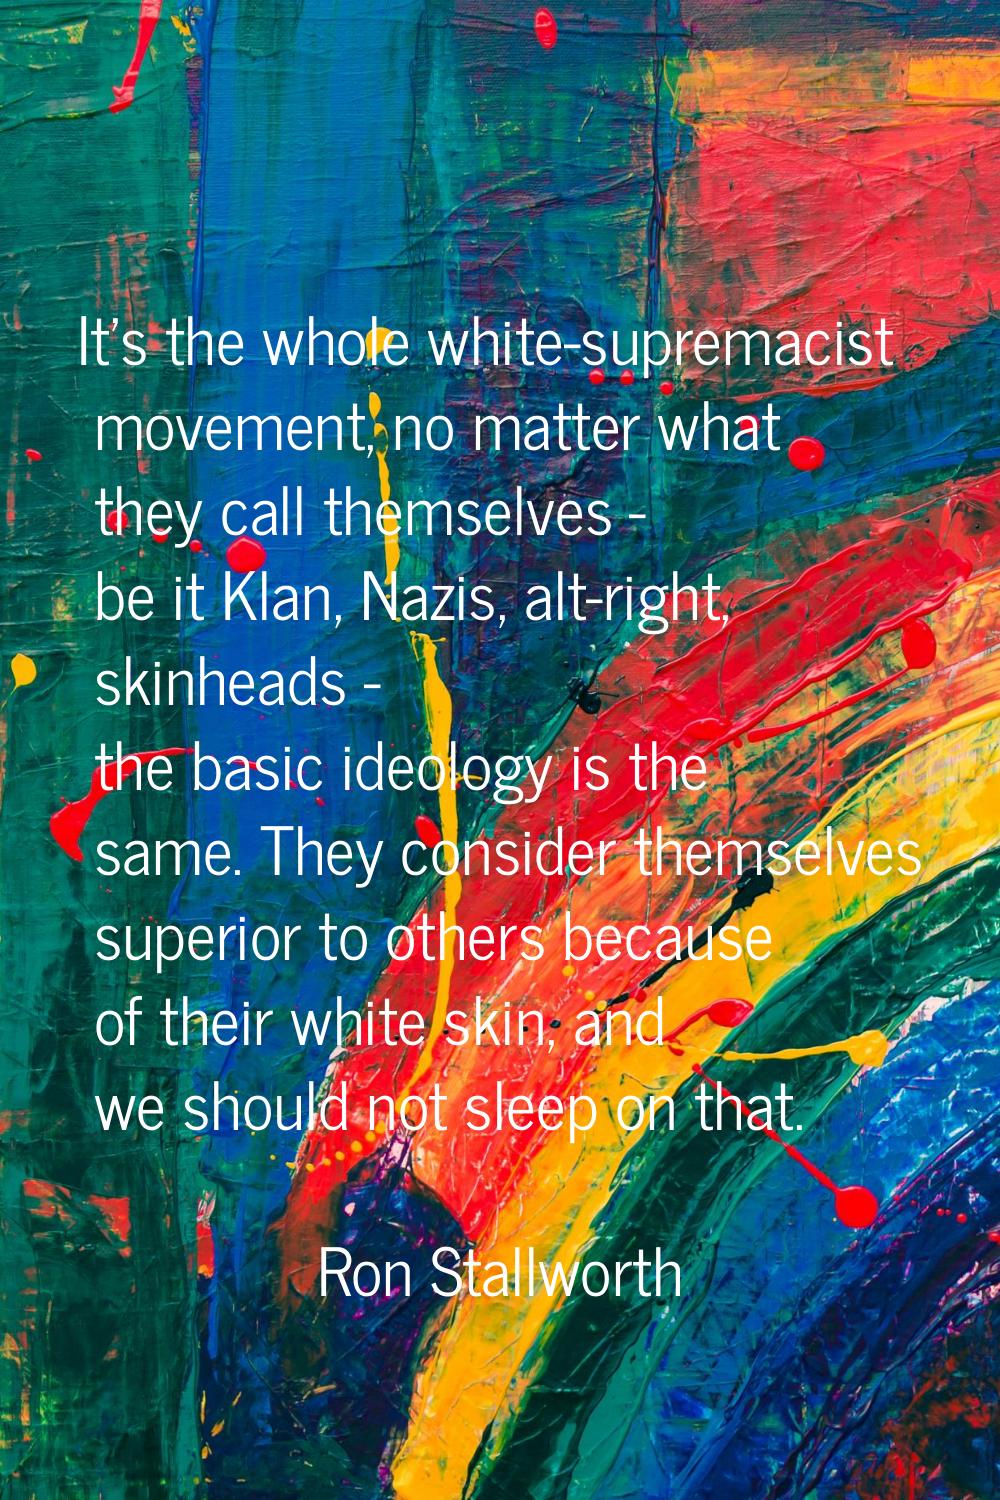 It's the whole white-supremacist movement, no matter what they call themselves - be it Klan, Nazis,